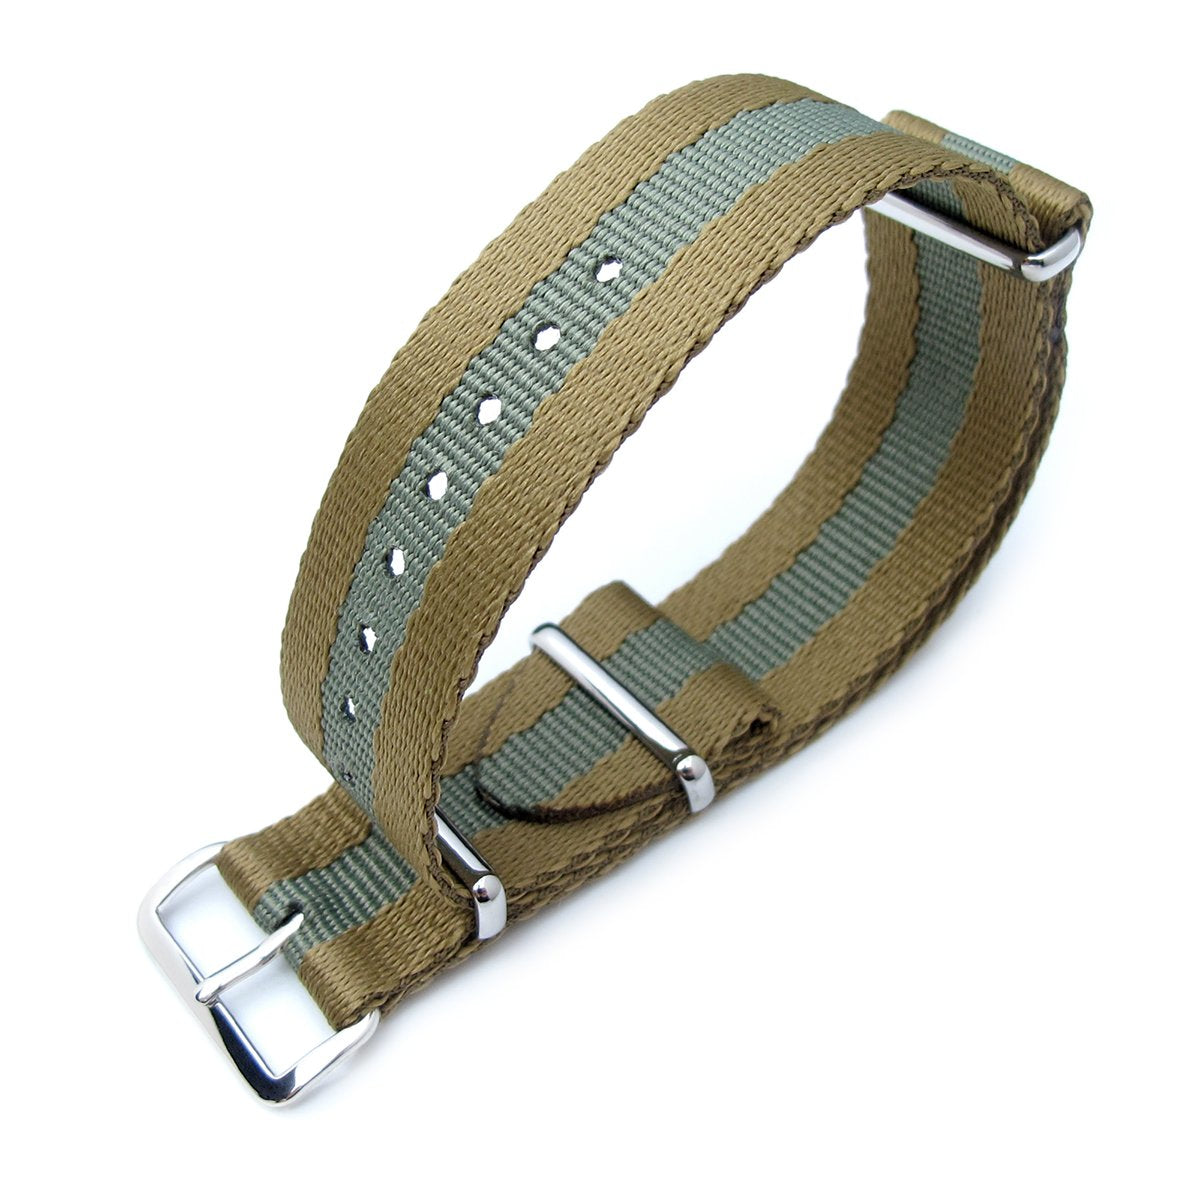 MiLTAT 20mm or 22mm G10 Military NATO Watch Strap Sandwich Nylon Armband Polished Military Green Strapcode Watch Bands